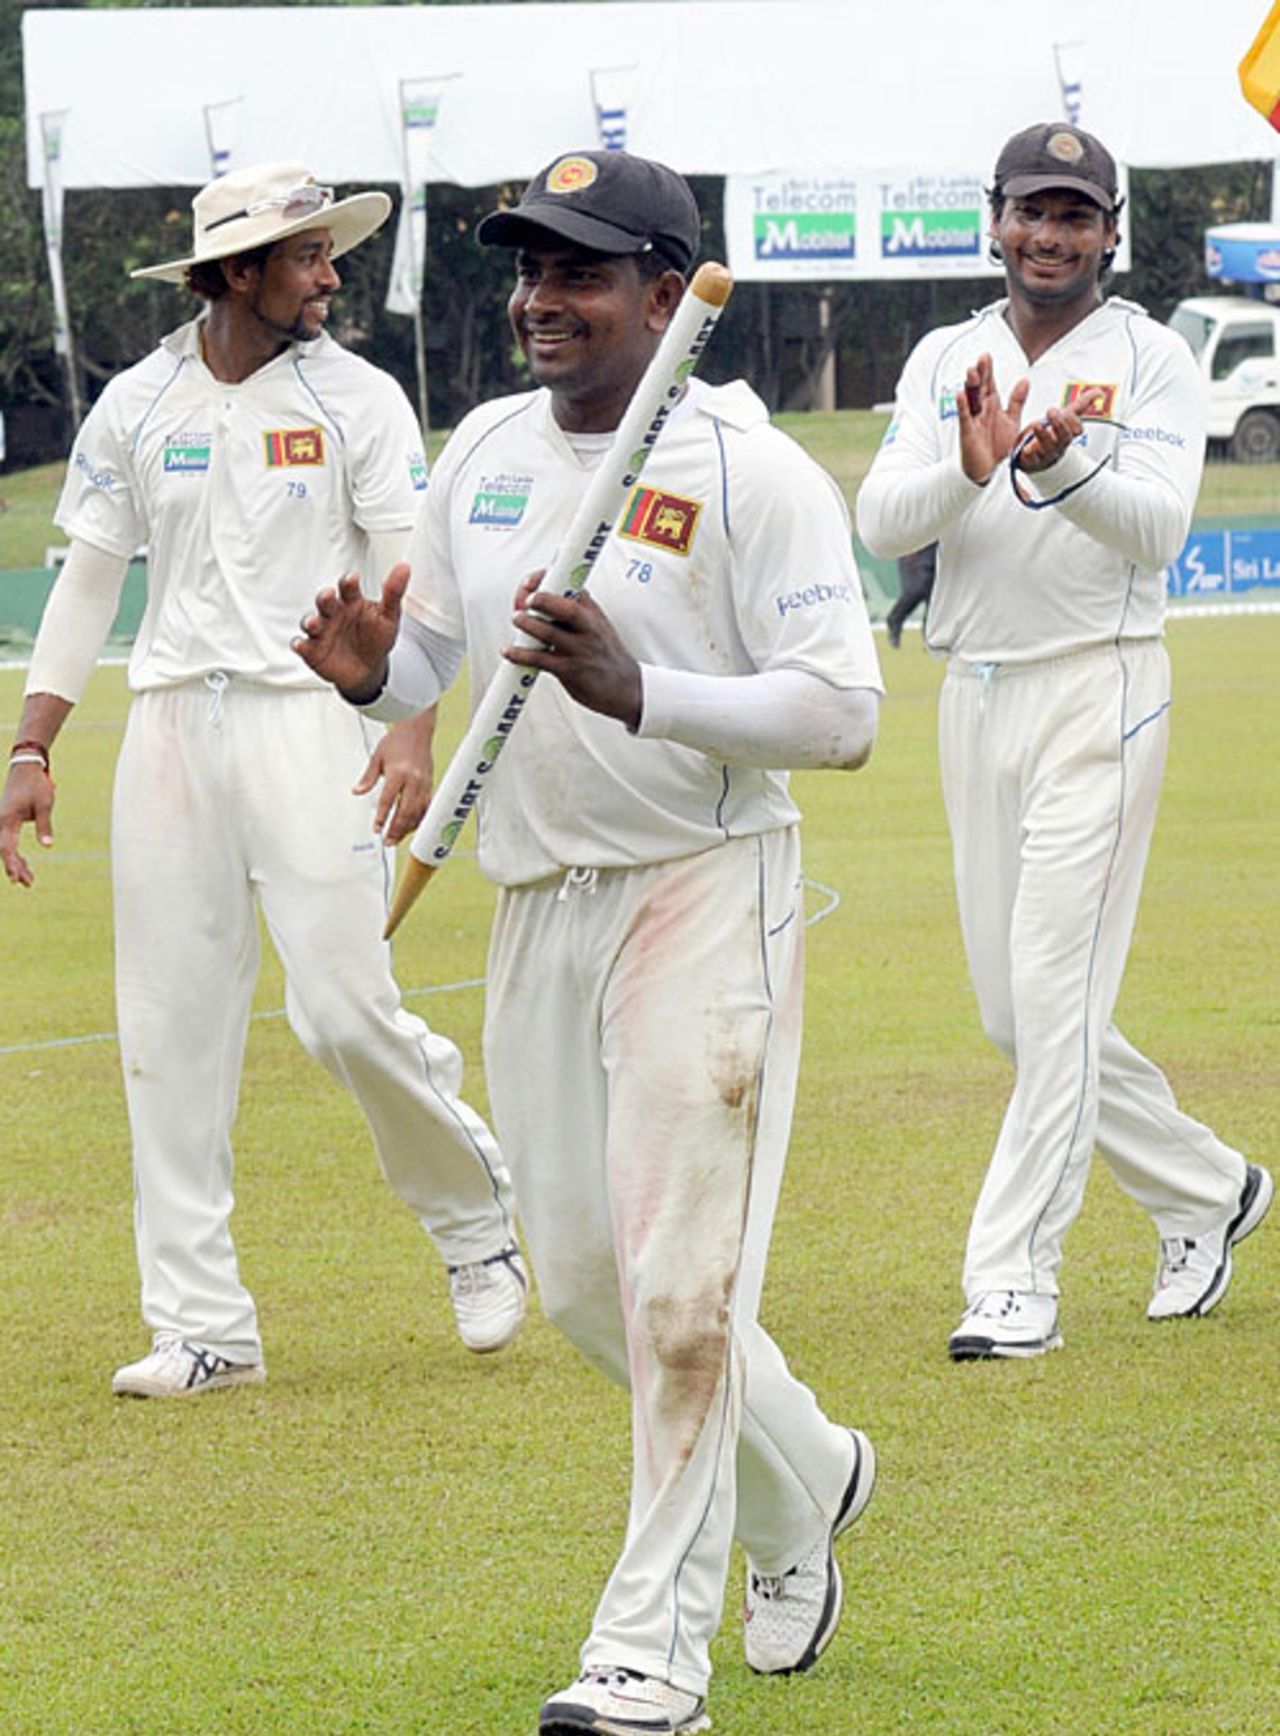 Rangana Herath is applauded by his team-mates, Sri Lanka v New Zealand, 2nd Test, SSC, 5th day, August 30, 2009